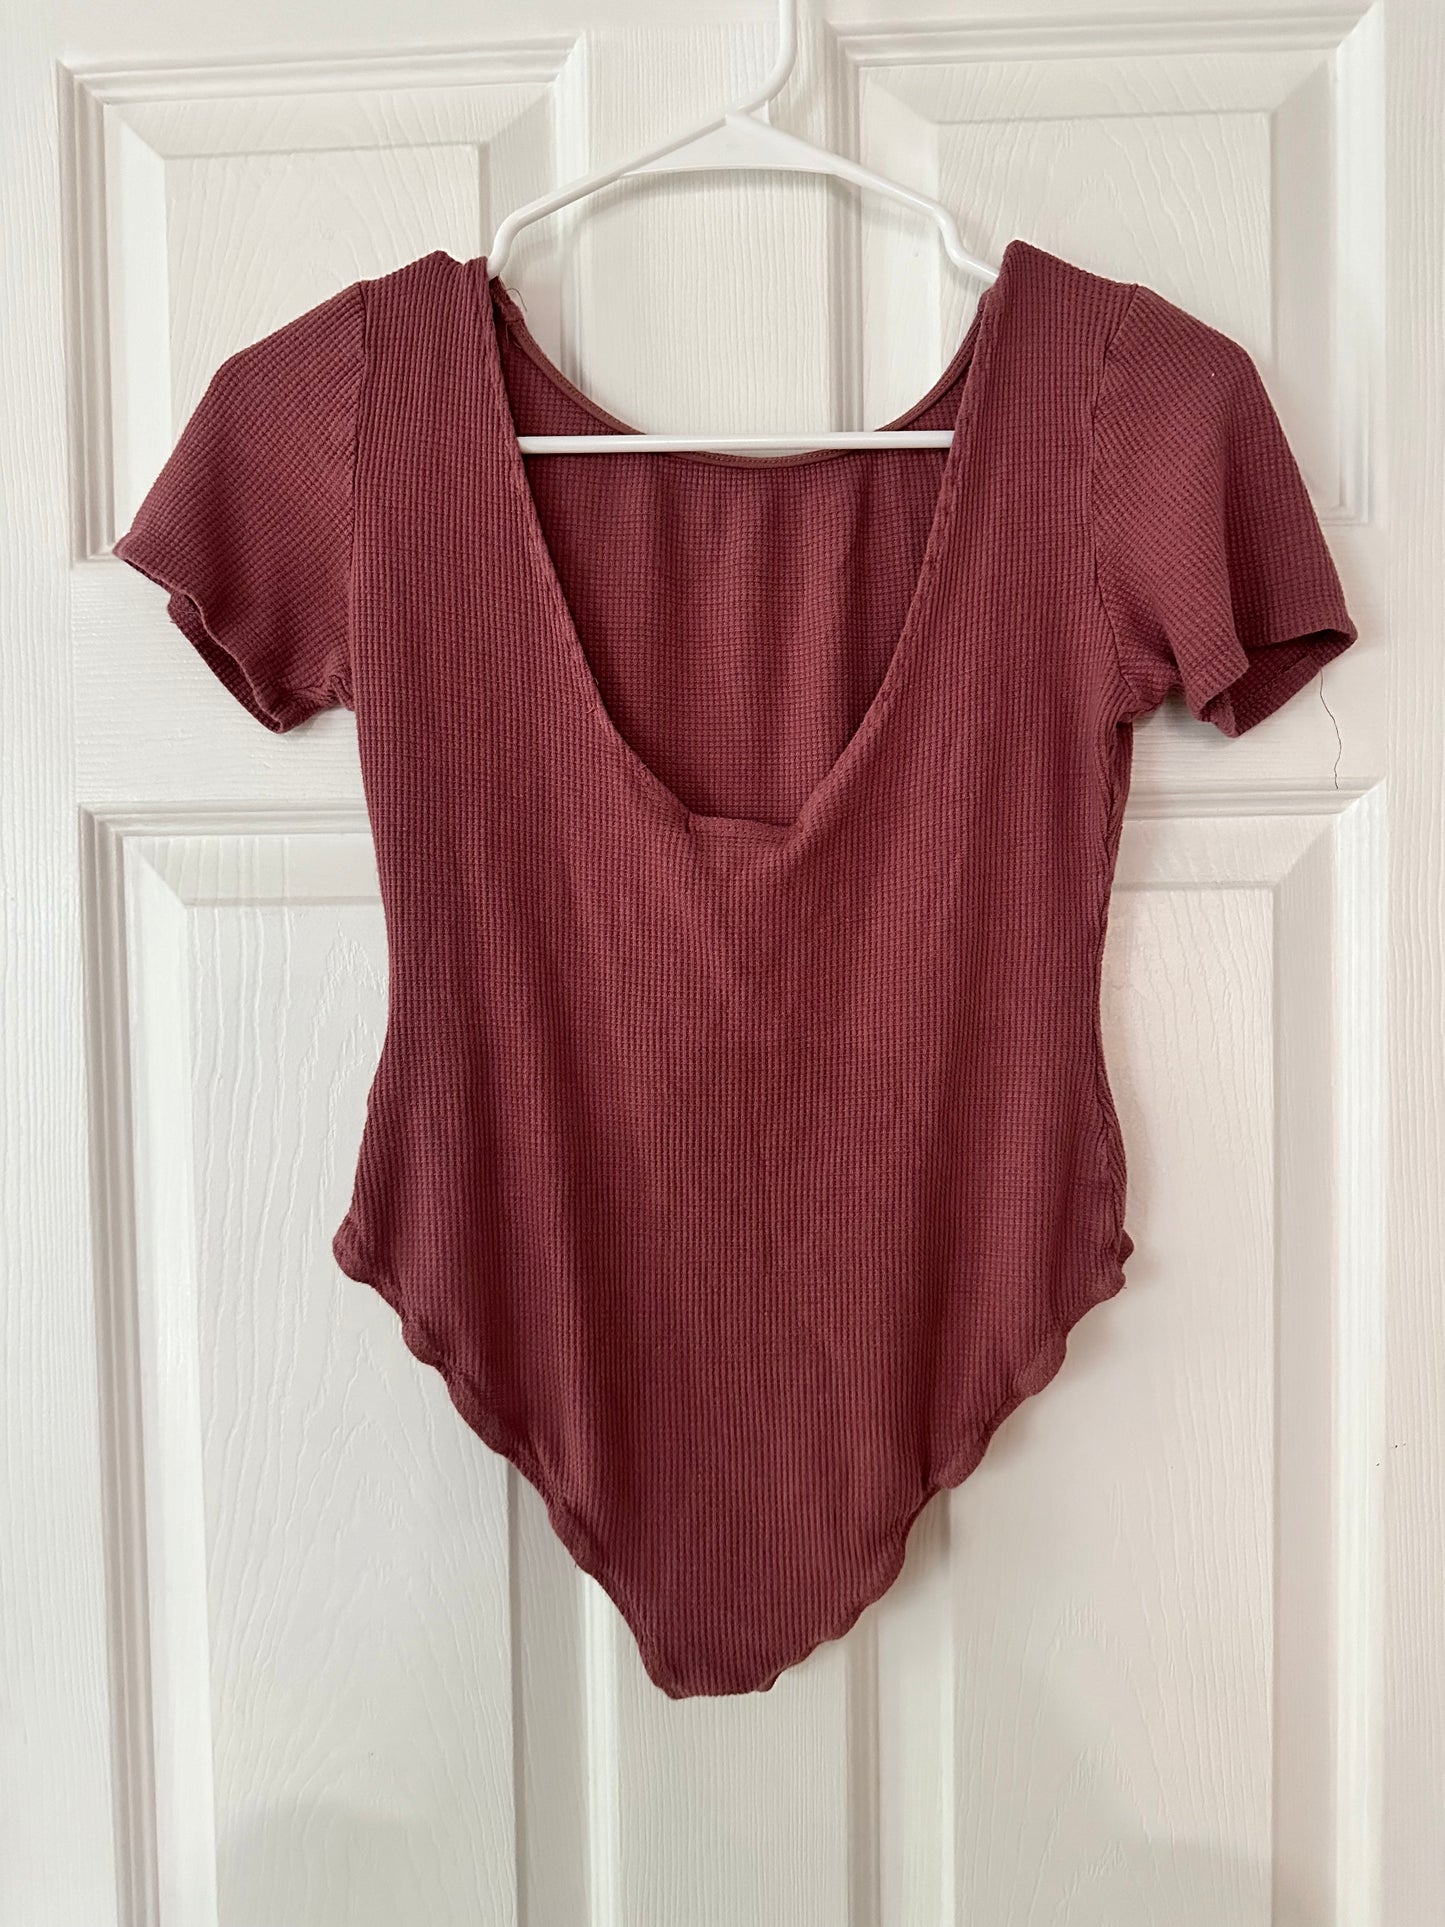 Large Forever 21 Body Suit